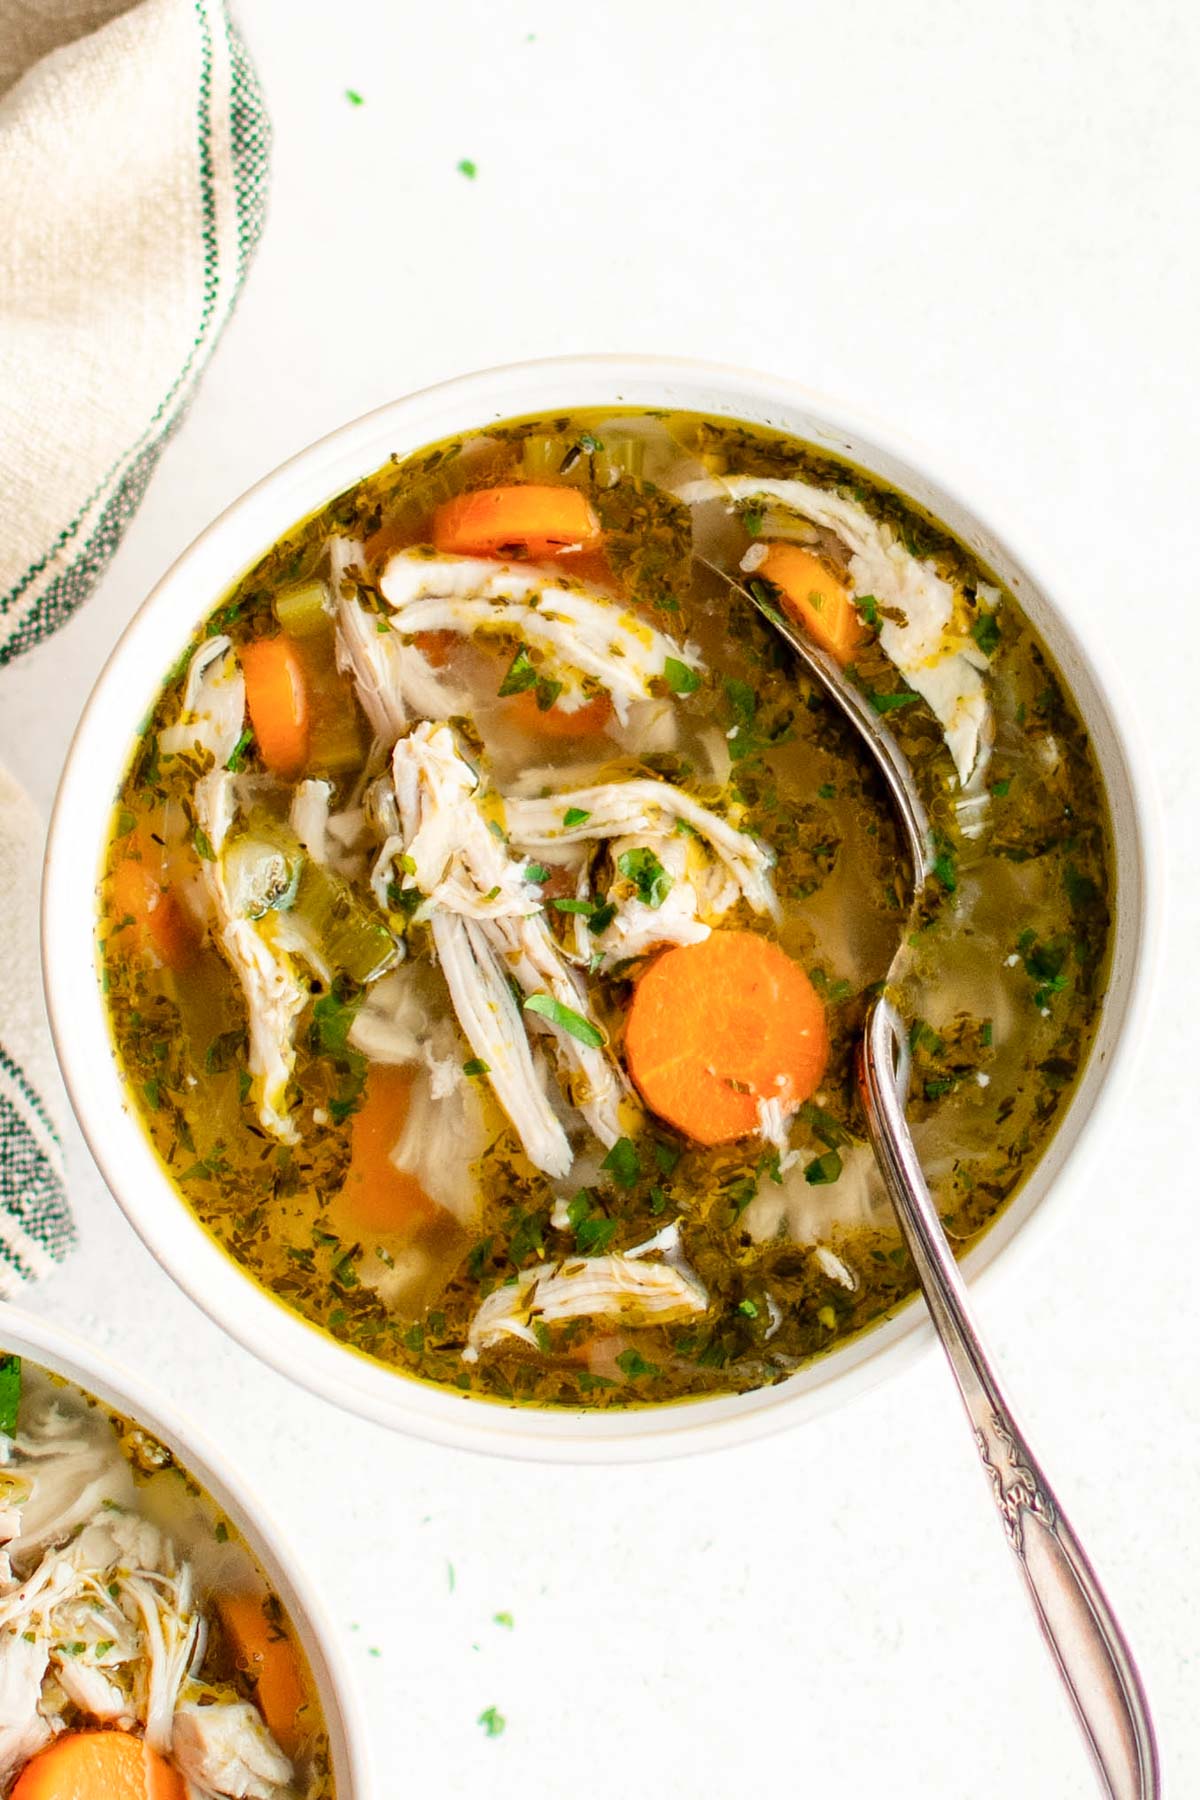 Chicken, carrots and herbs in soup broth in a small bowl with a spoon